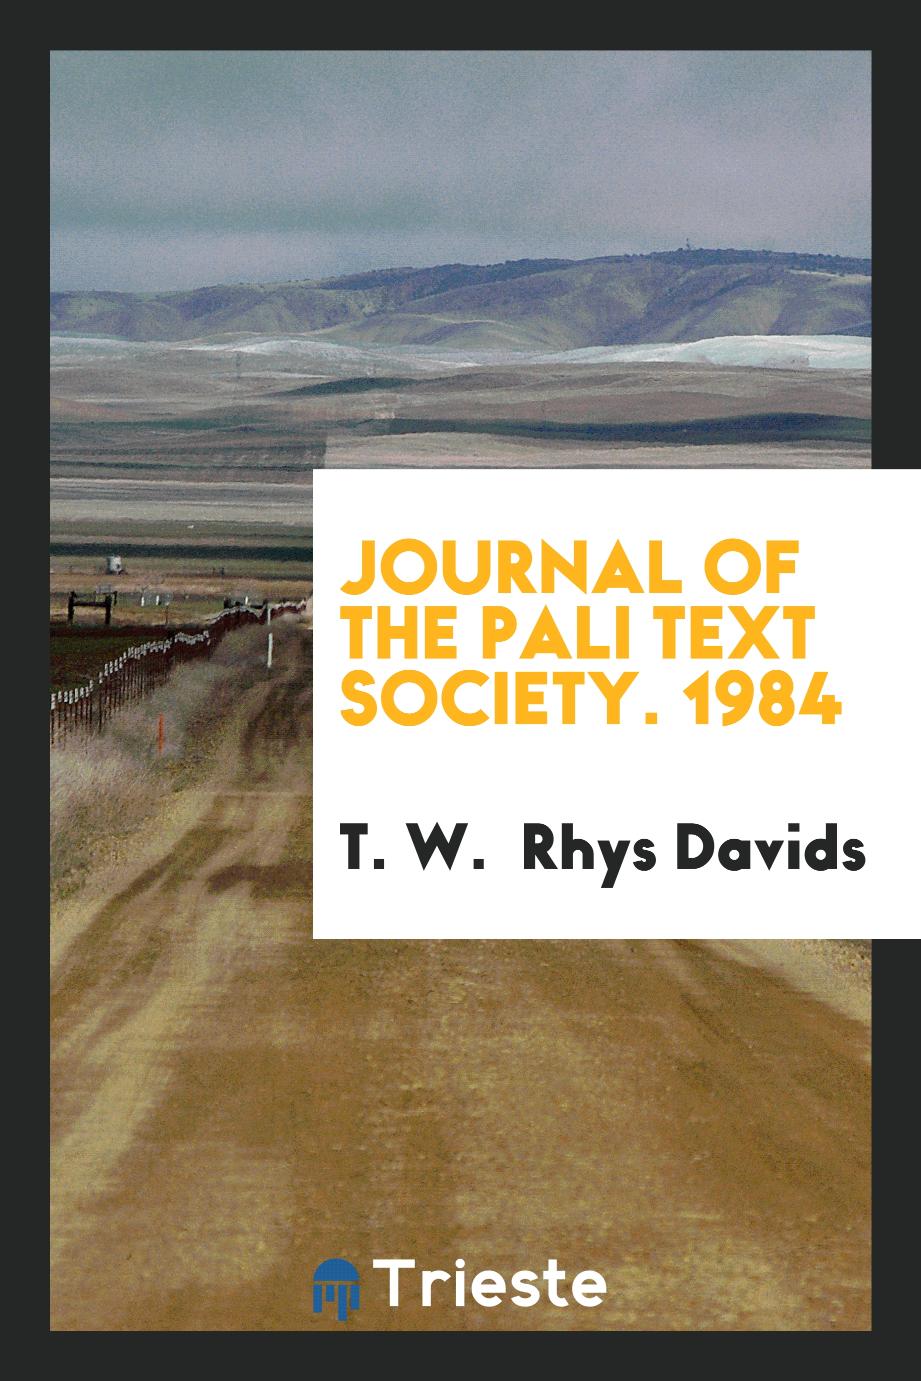 Journal of the Pali Text Society. 1984